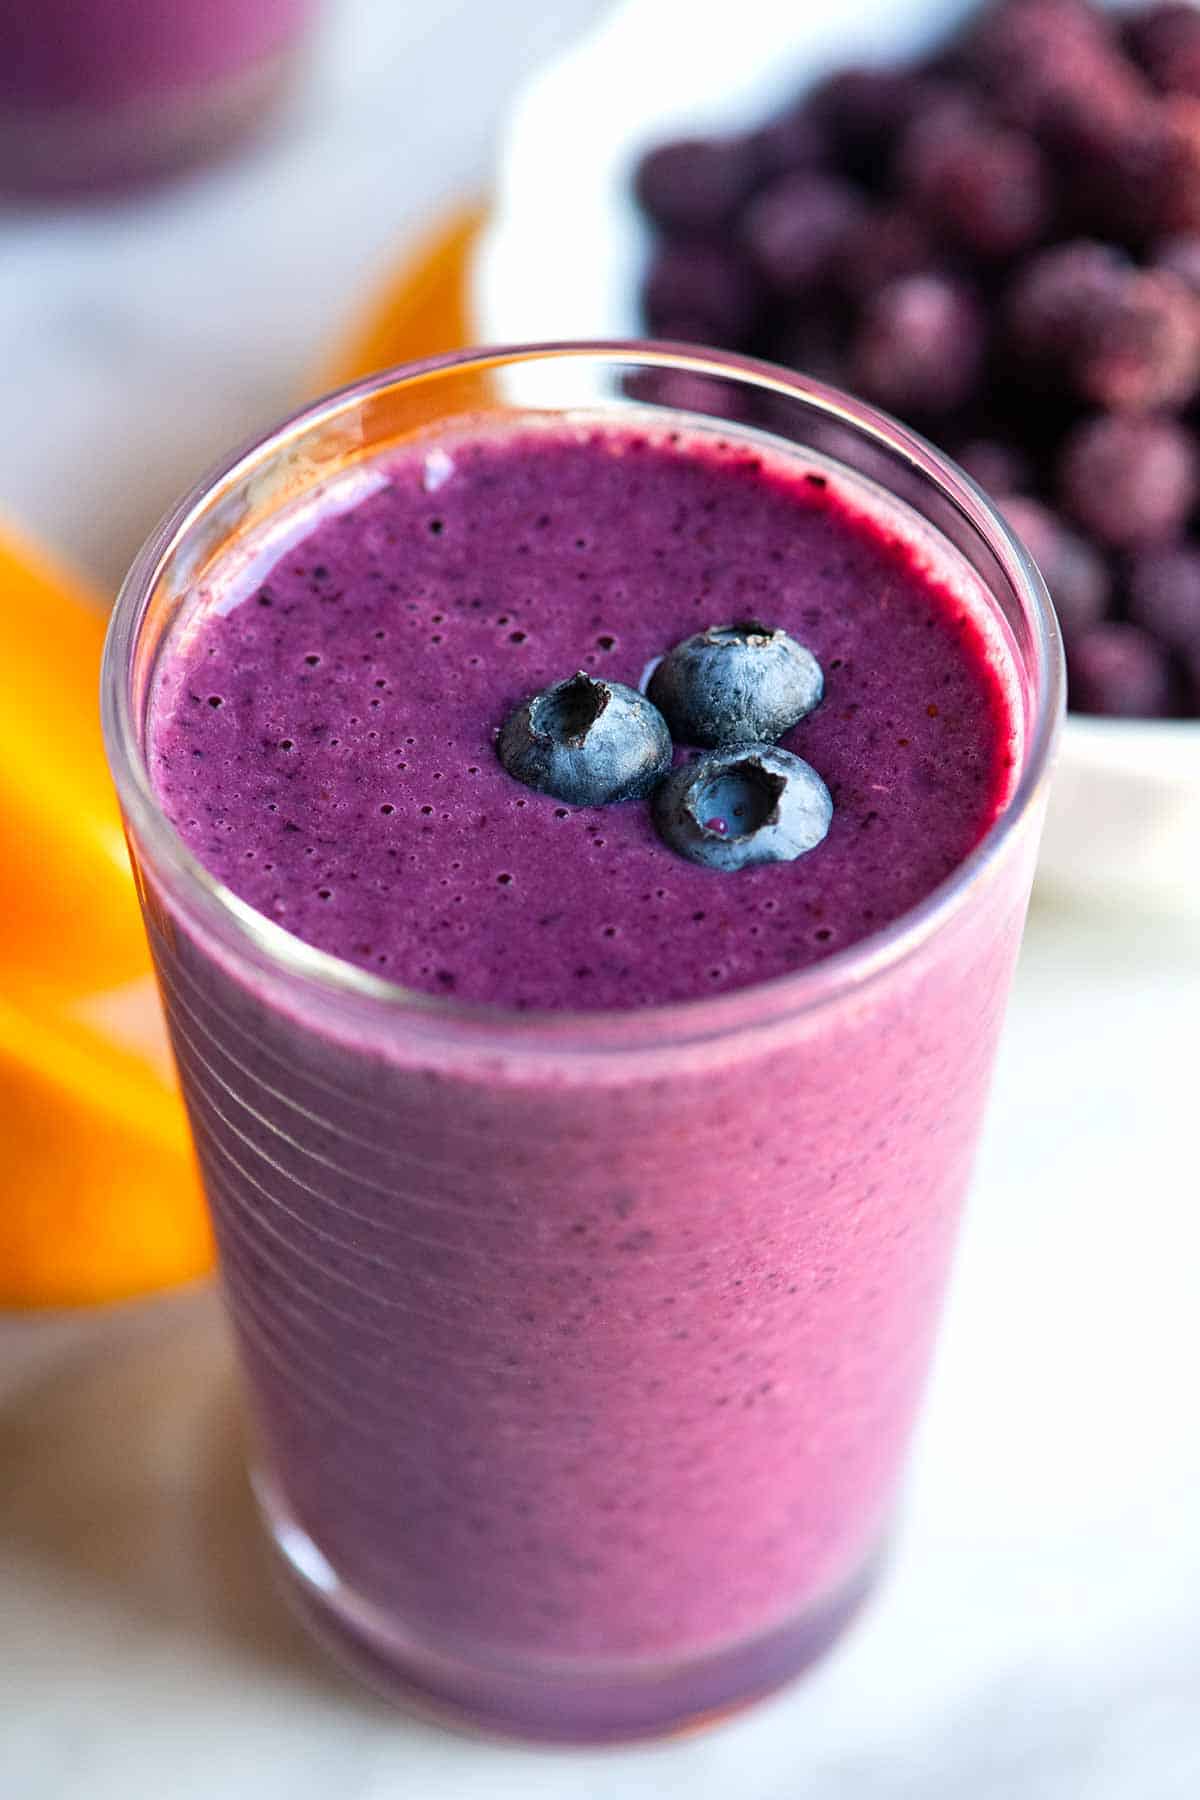 How To Make Easy Blueberry Smoothie Blissjuicesmoothieself